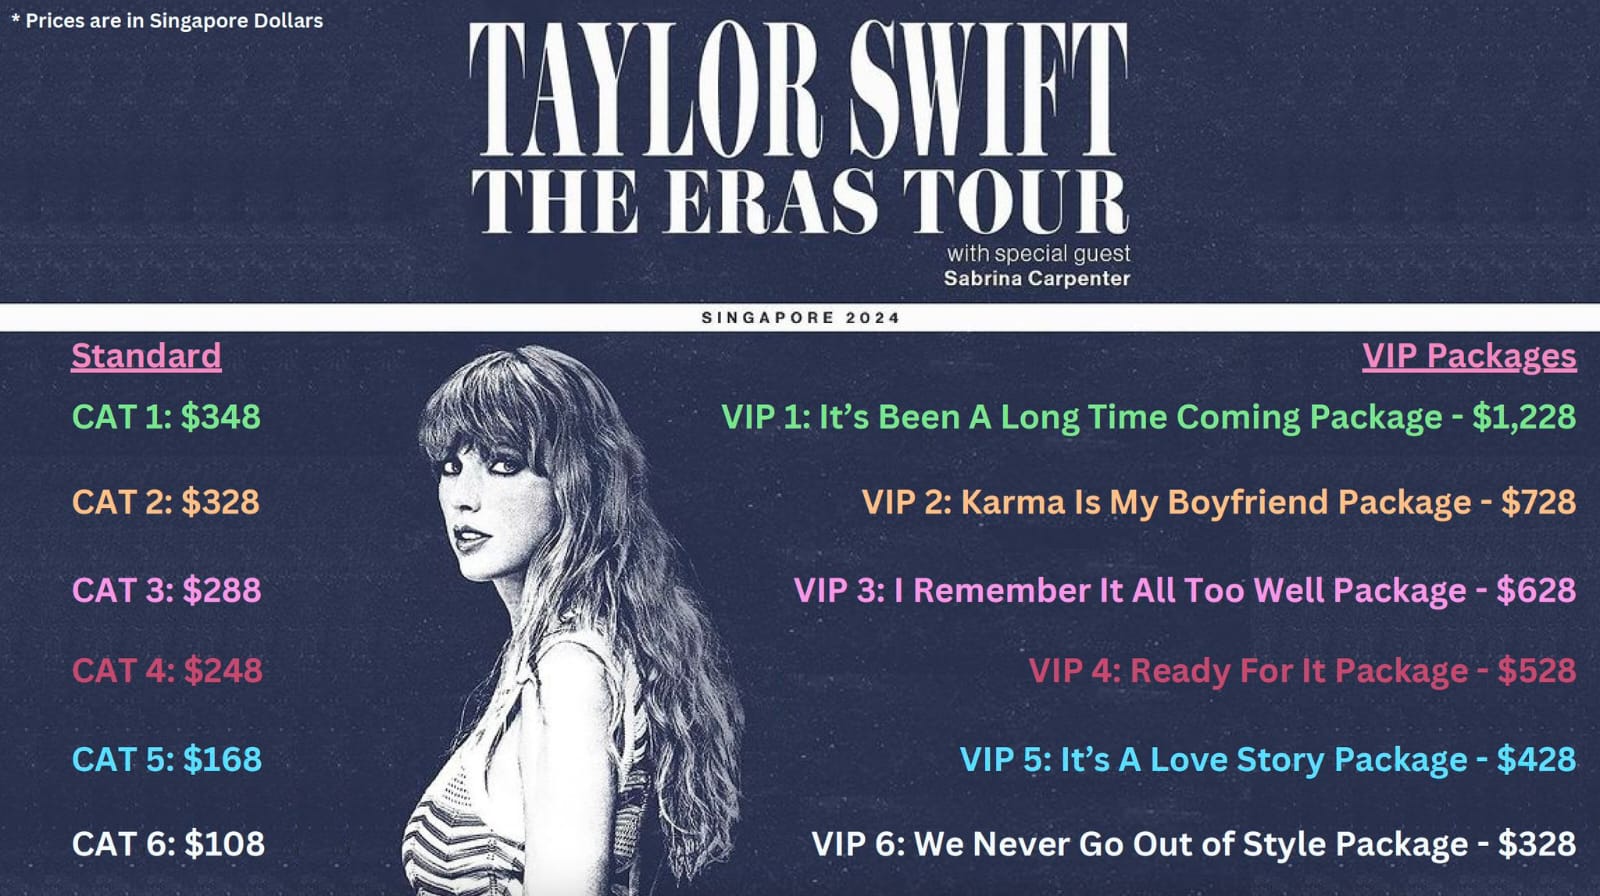 taylor swift tour singapore tickets